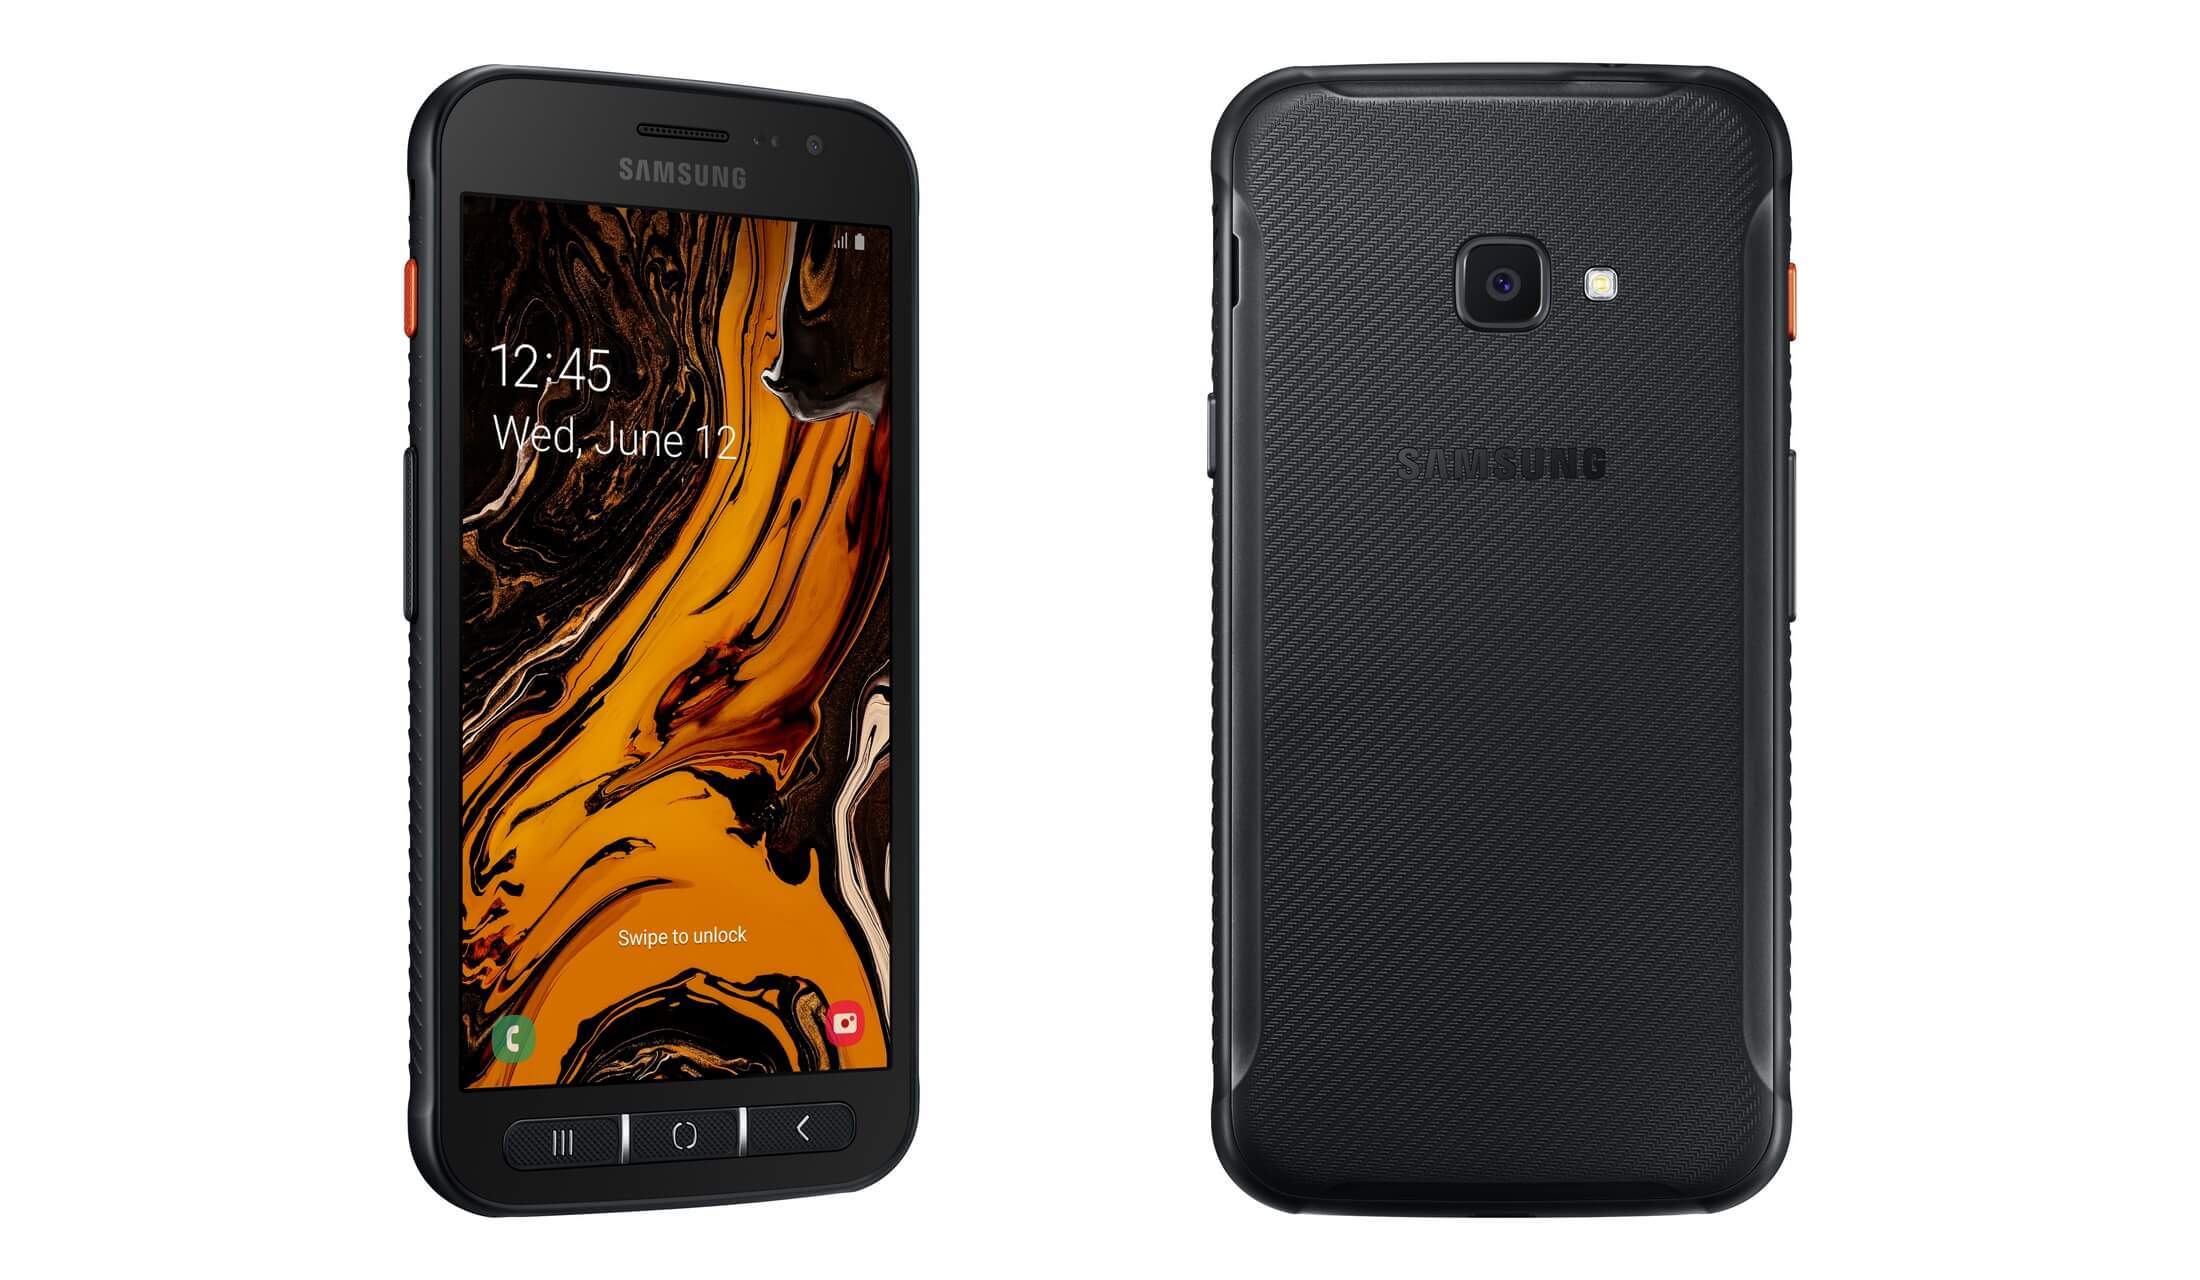 Samsung Xcover 4s